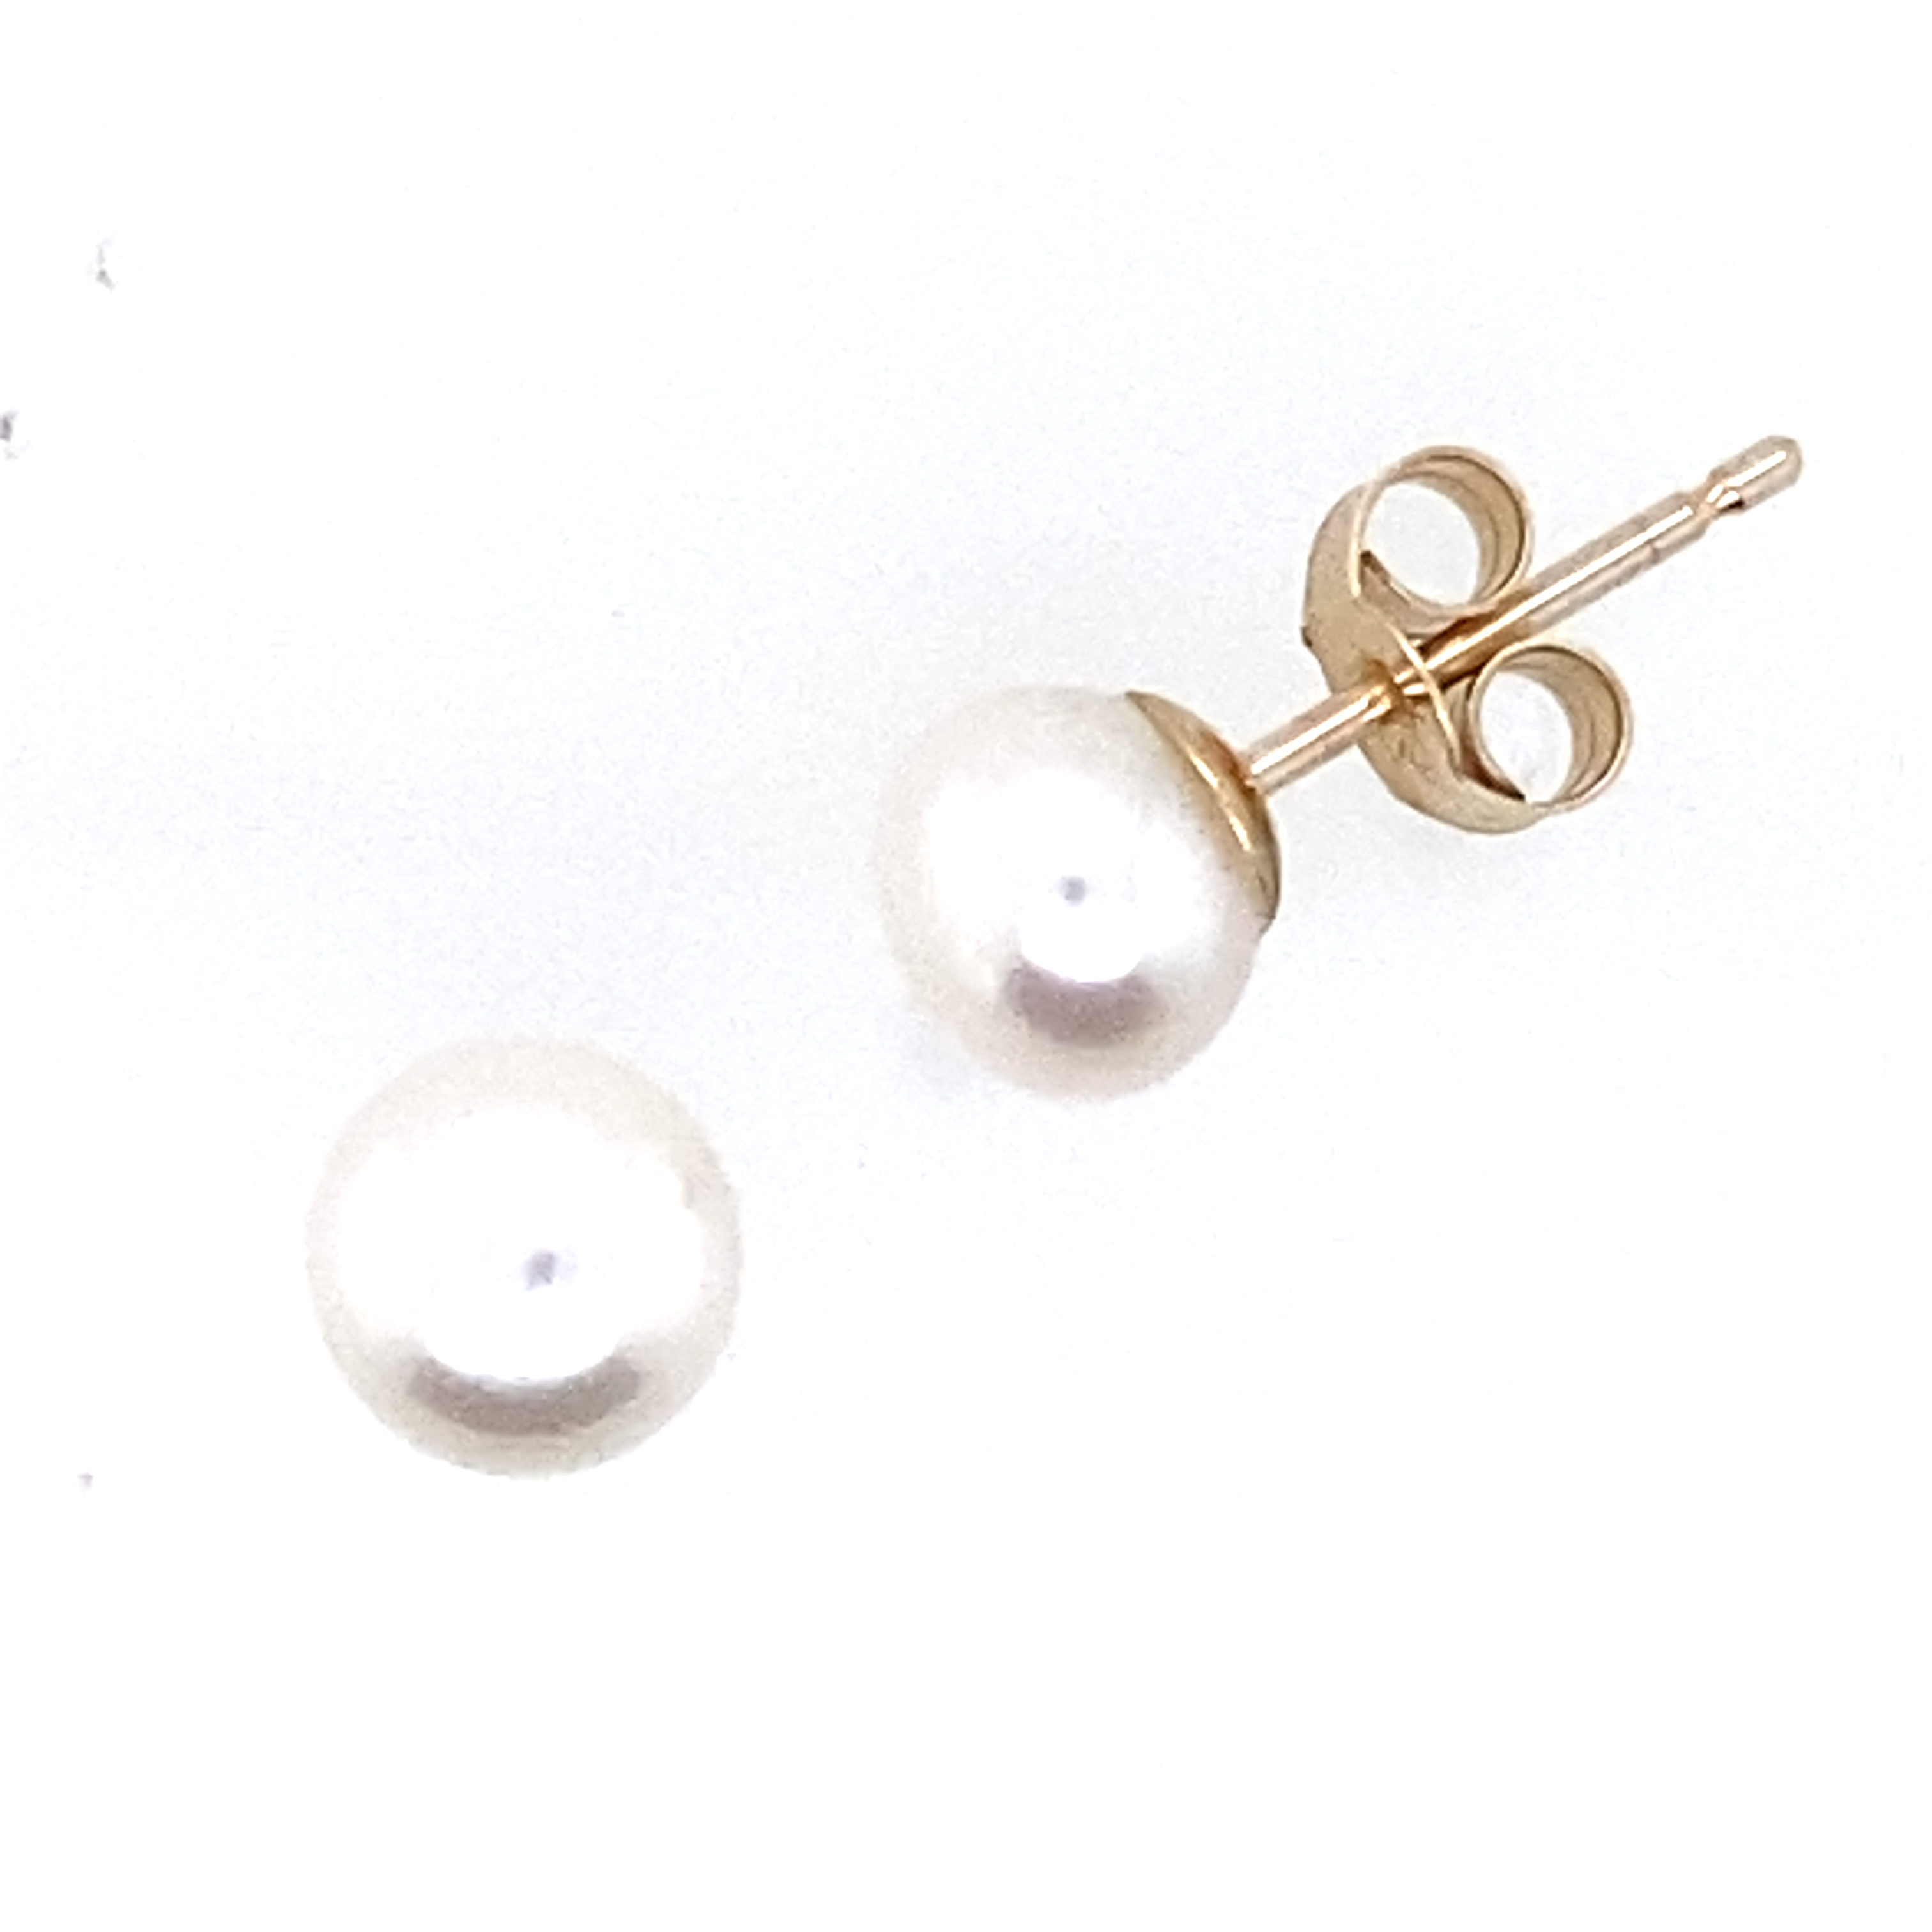 6mm Fresh Water Pearl Studs on a 9 Carat Yellow Gold Studs